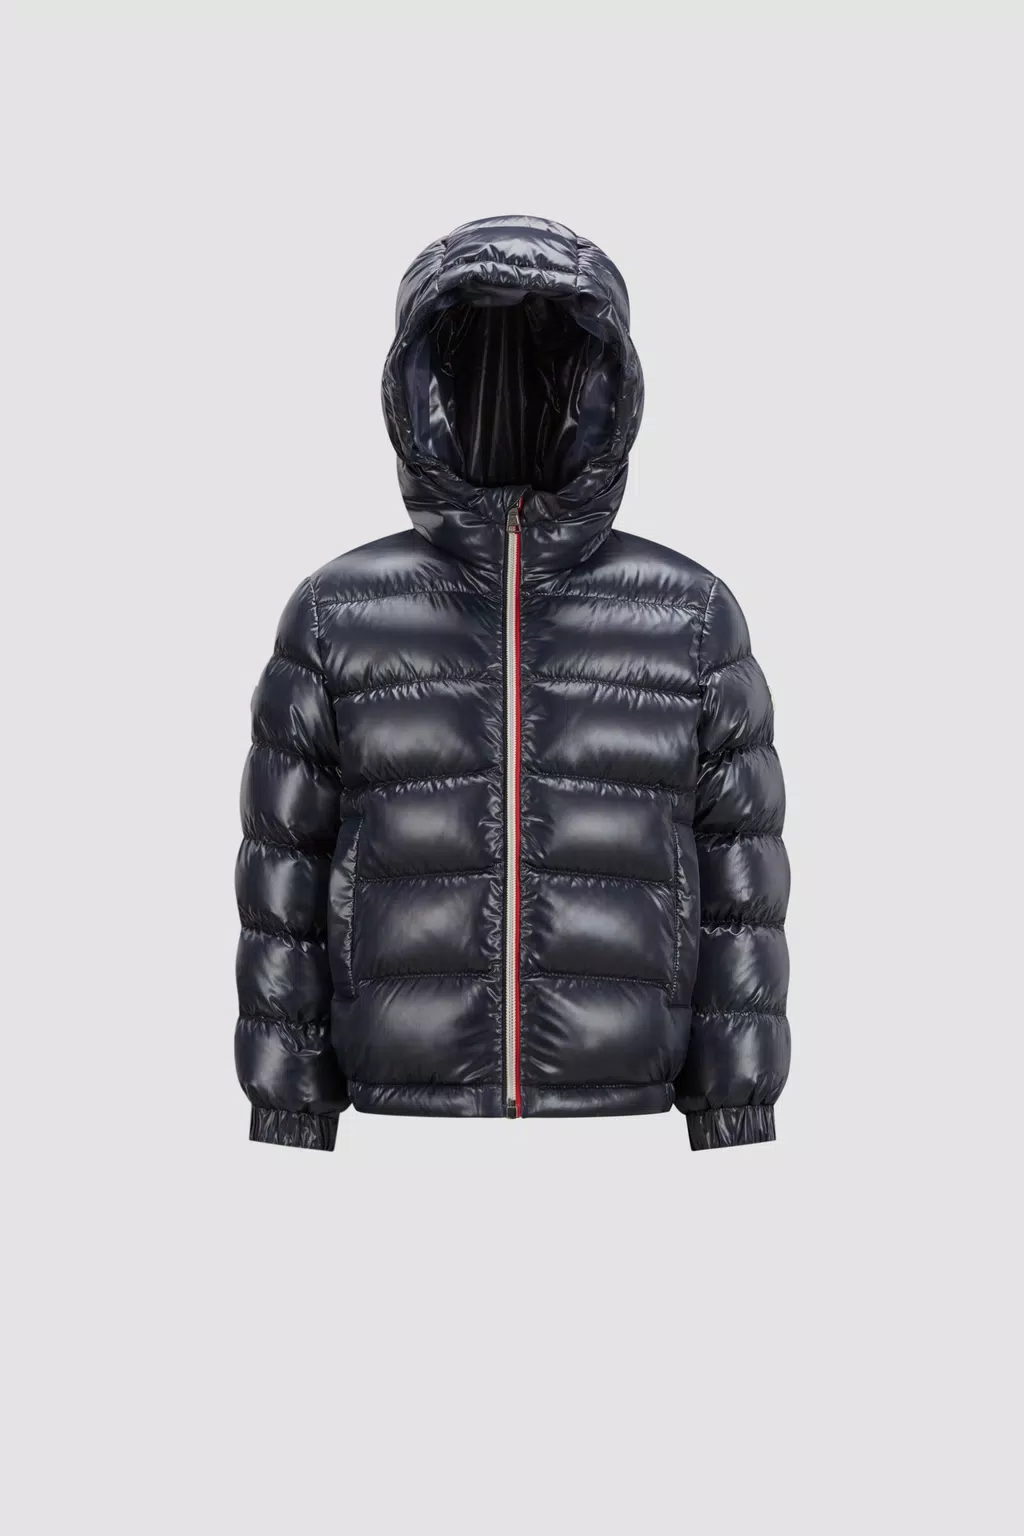 Moncler US Online Shop — Down jackets, coats, and clothing